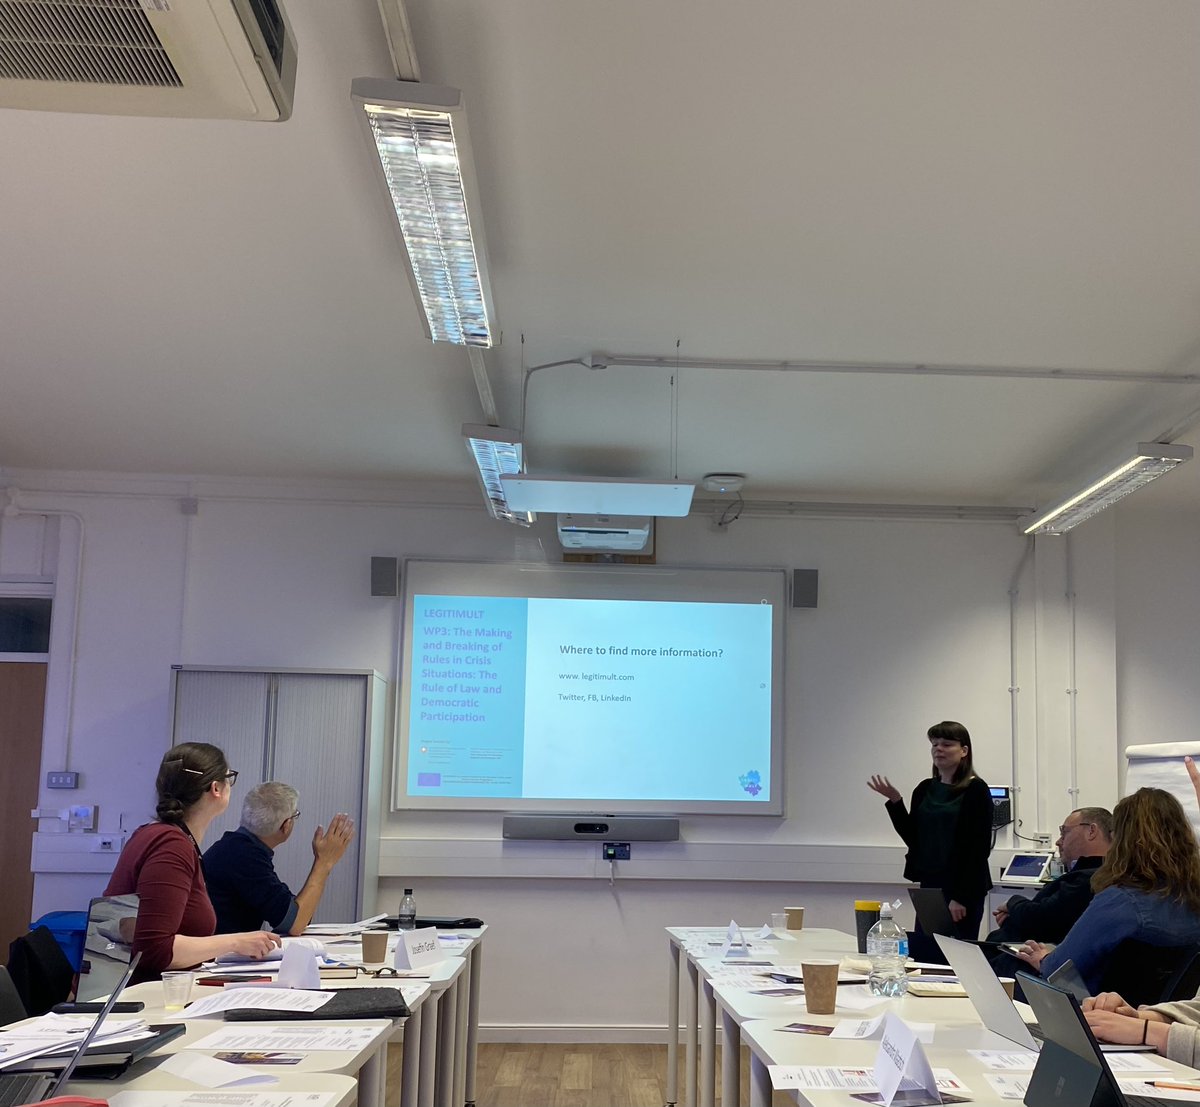 Democratic quality of decisions as an aspect of legitimate crisis management in #multilevel systems: @edinaszocsik presents first insights from the @legitimult project at @ShifTerr_Aston workshop